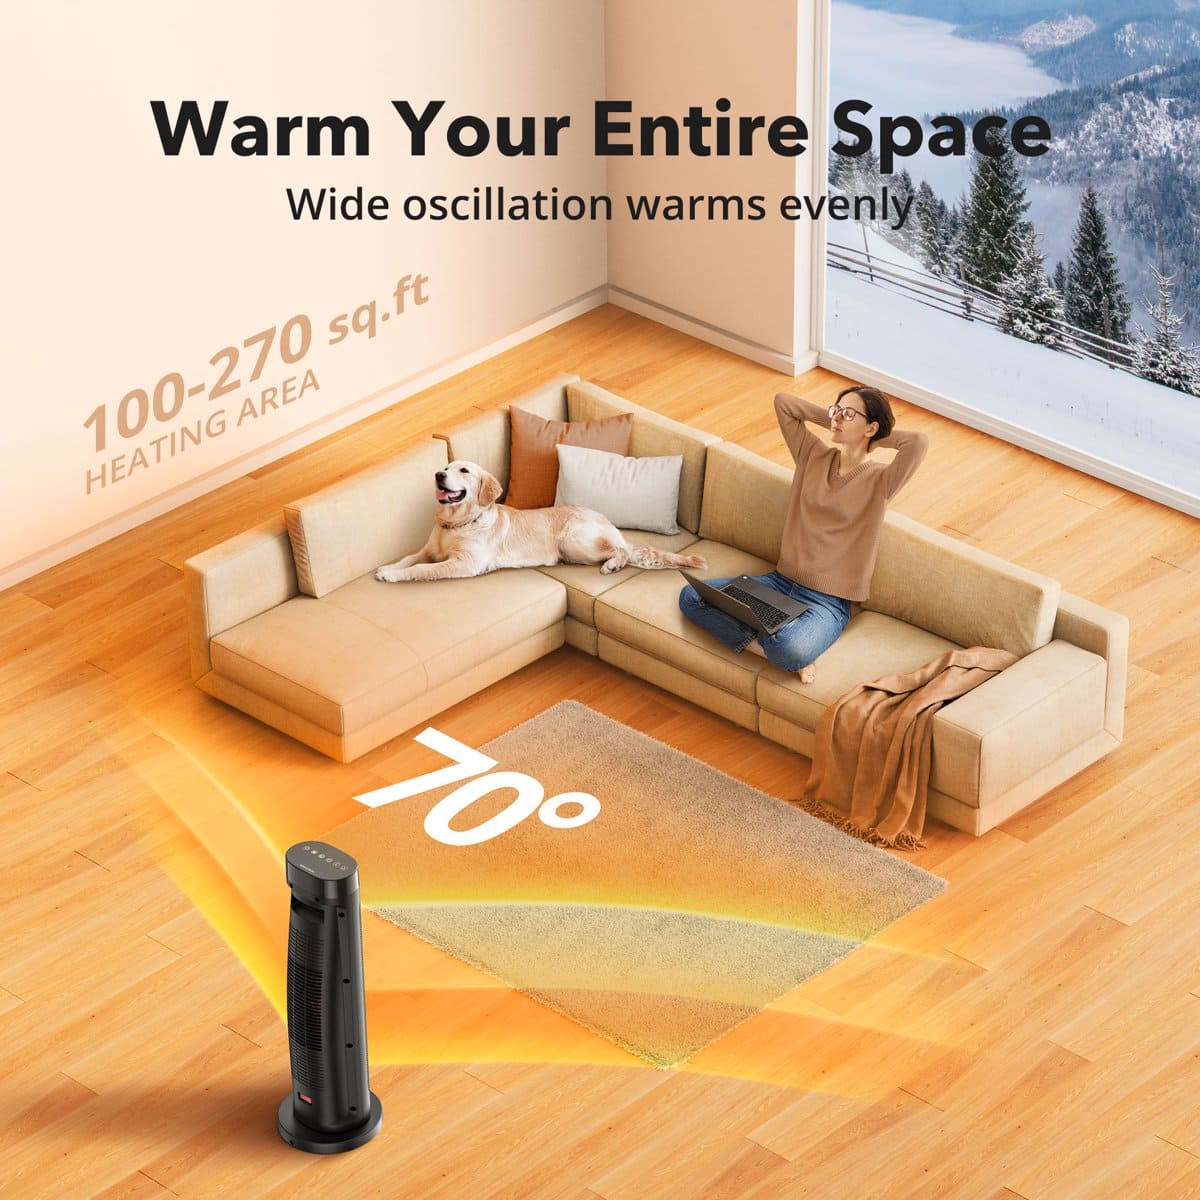 TaoTronics Space Heater, 1500W Portable Electric Heater from Walmart